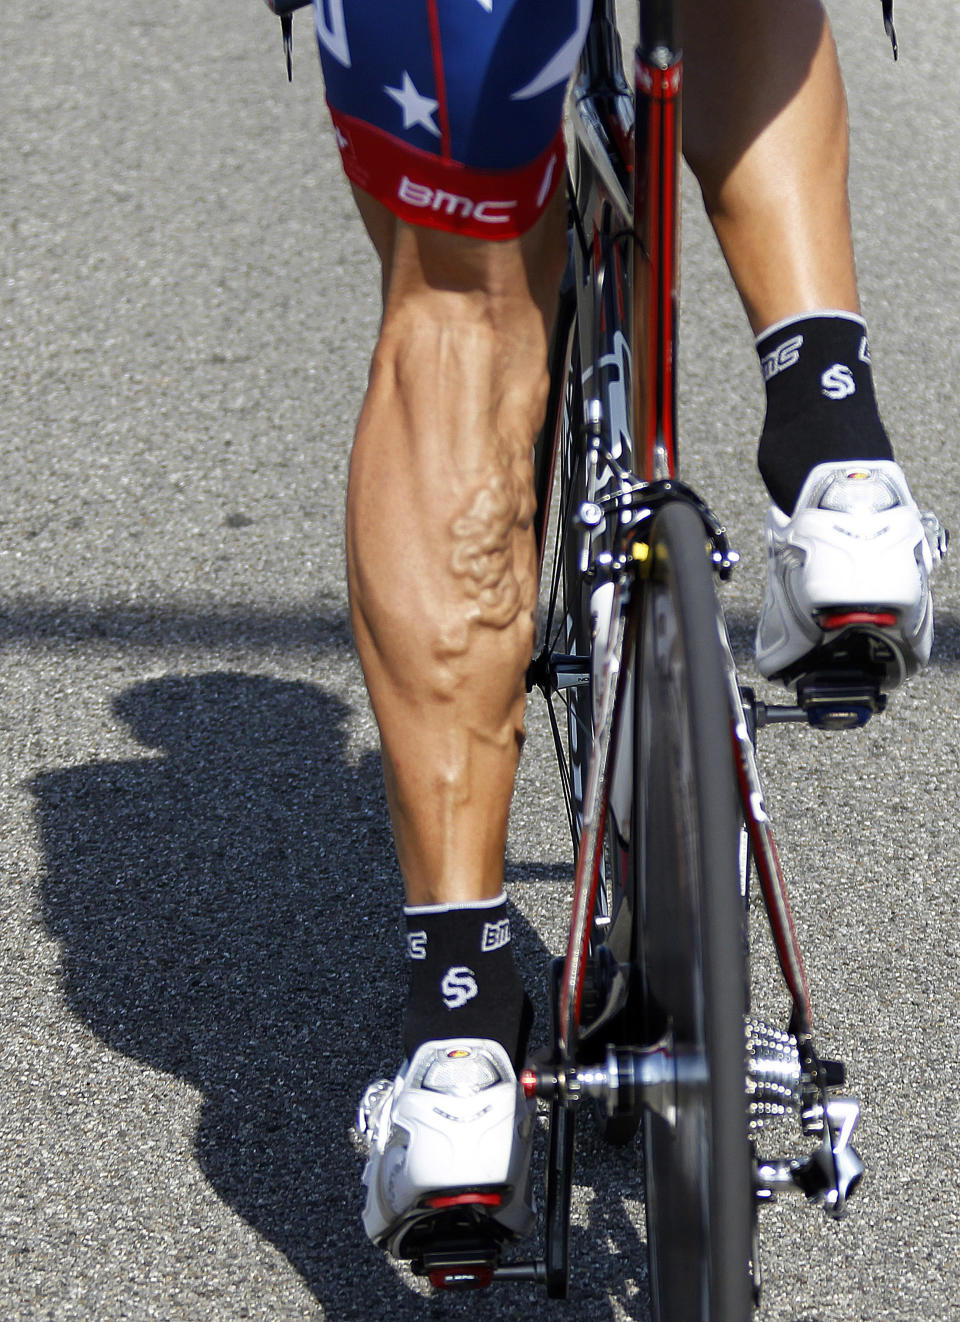 American cyclist George Hincapie is seen during a training session for the Tour de France in 2010.